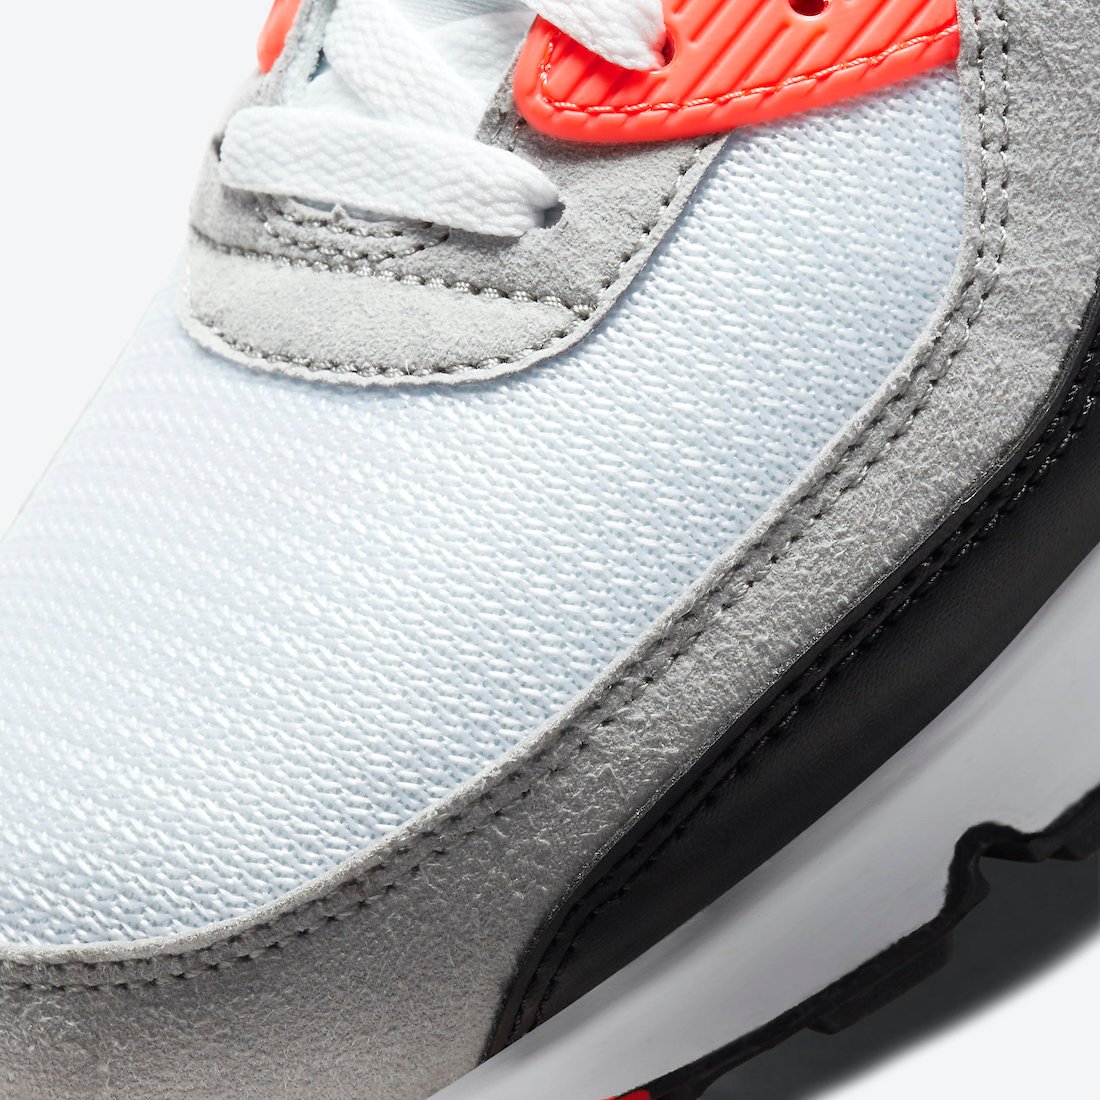 Nike Air Max 90 Infrared CT1685-100 Release Details